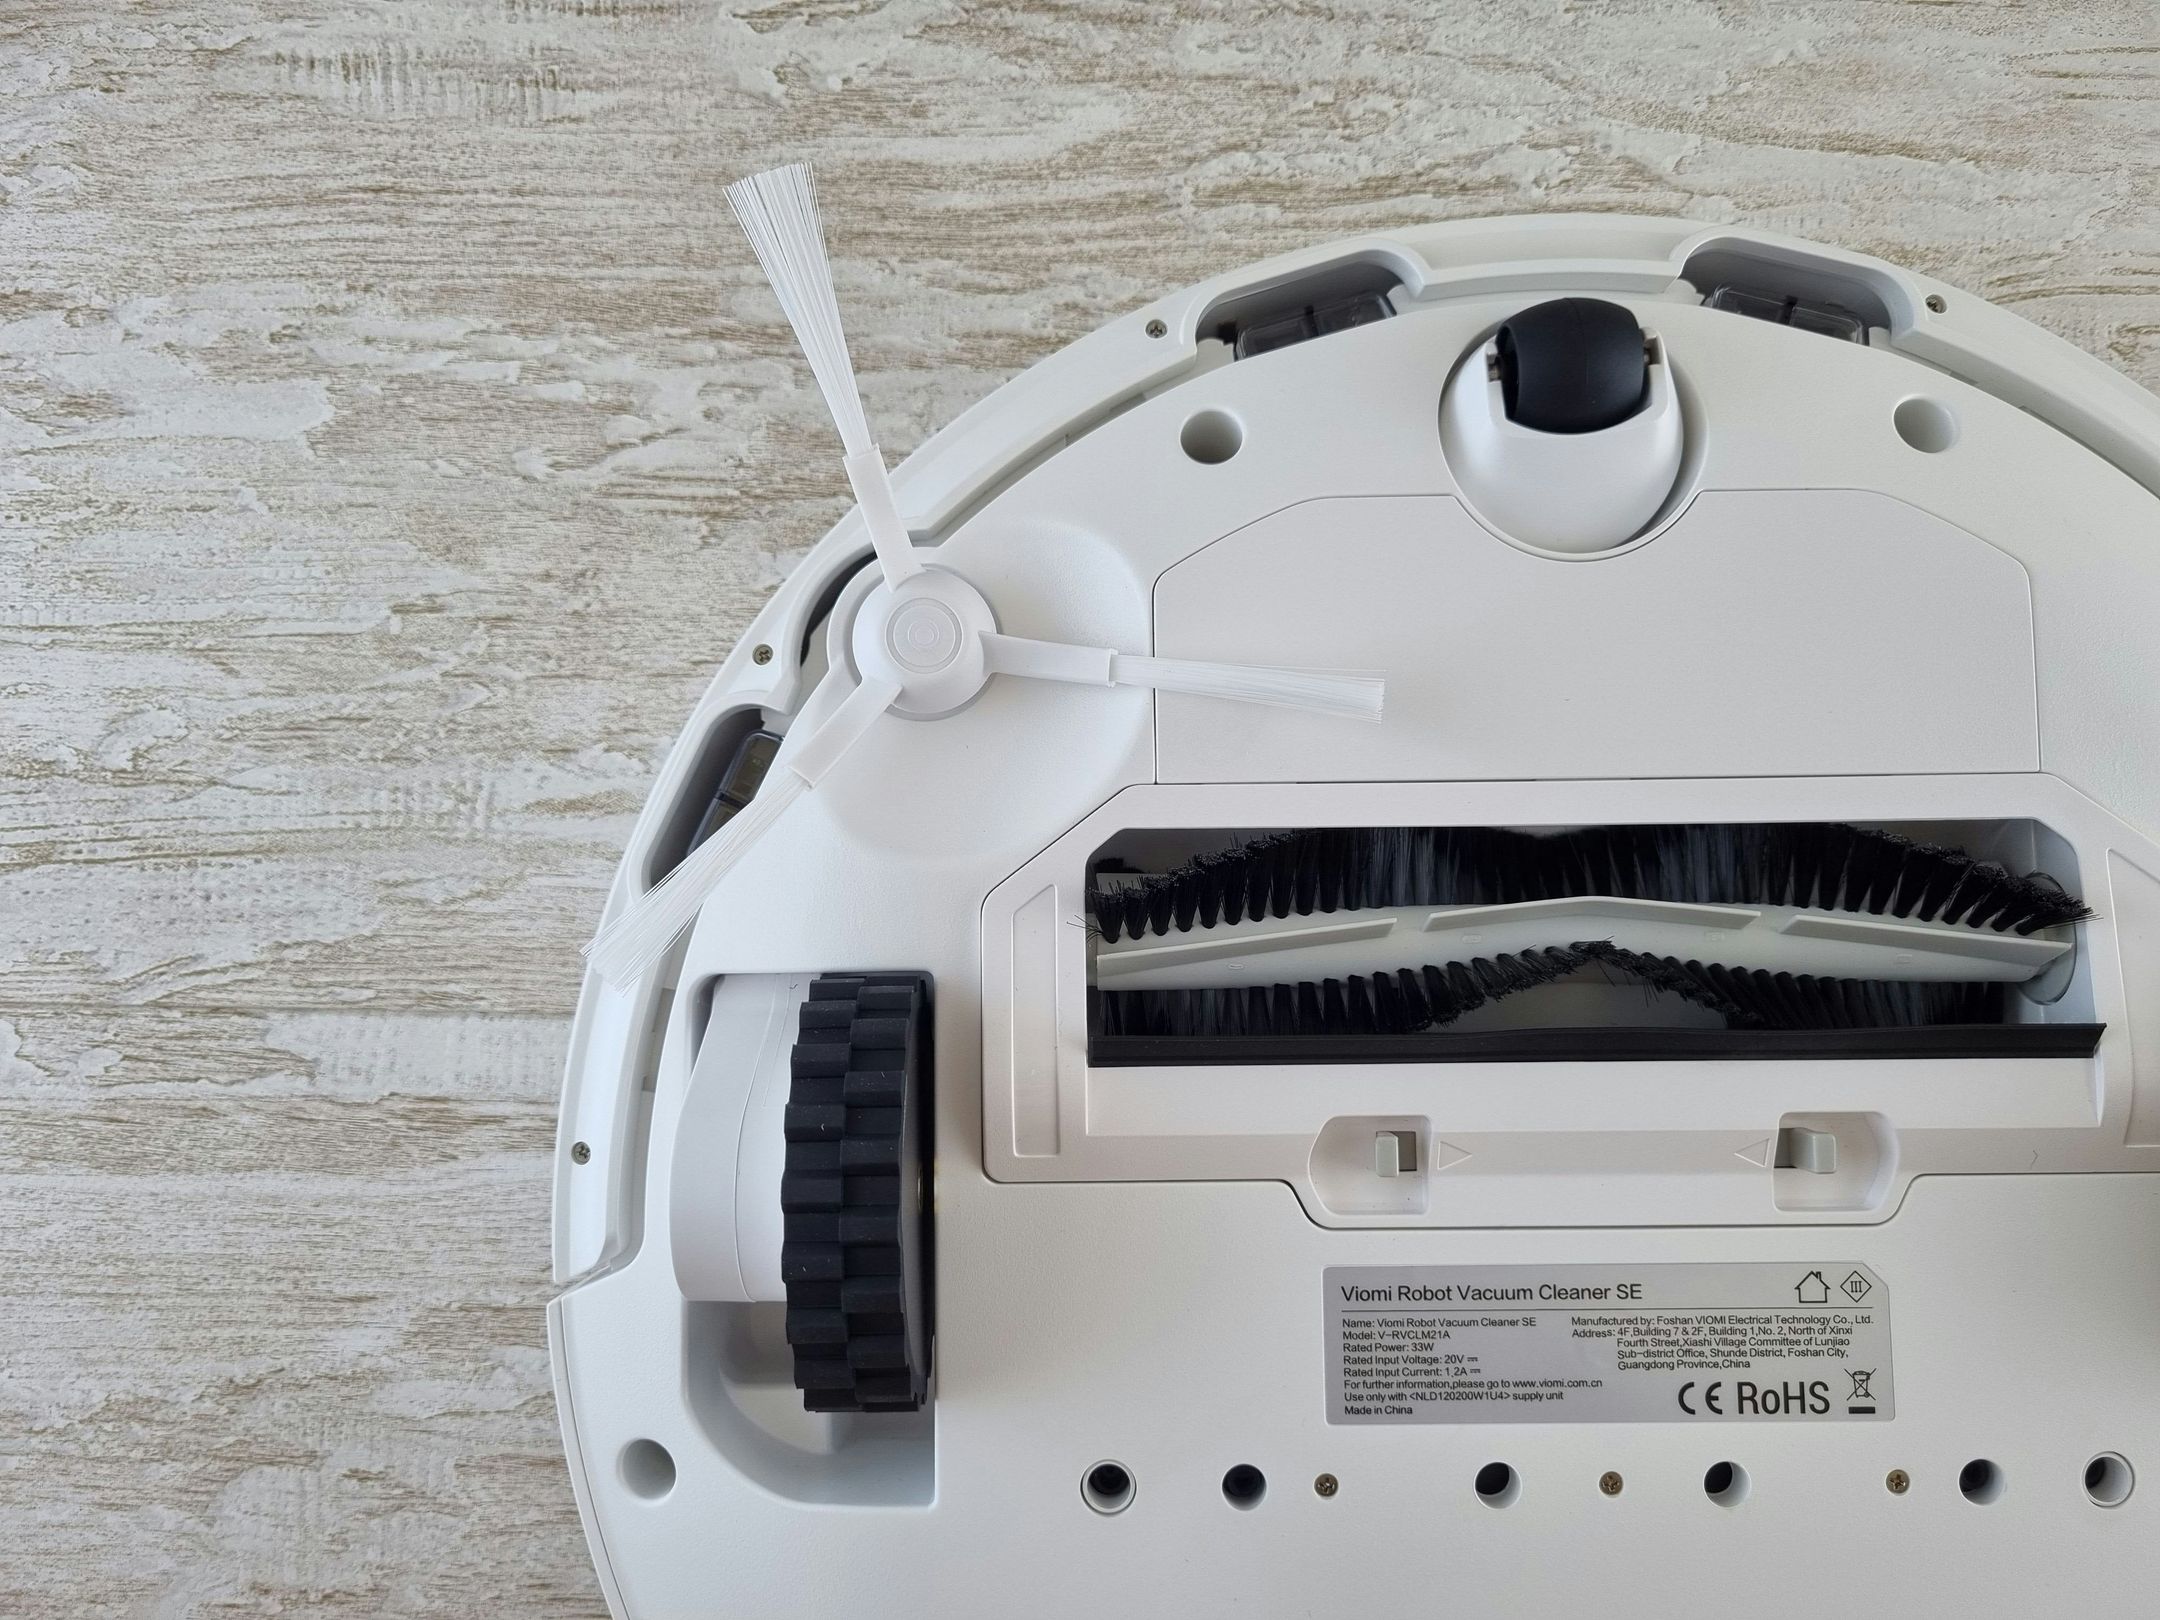 Cracking the Code: Why Does My Robot Vacuum Keep Shutting Off?